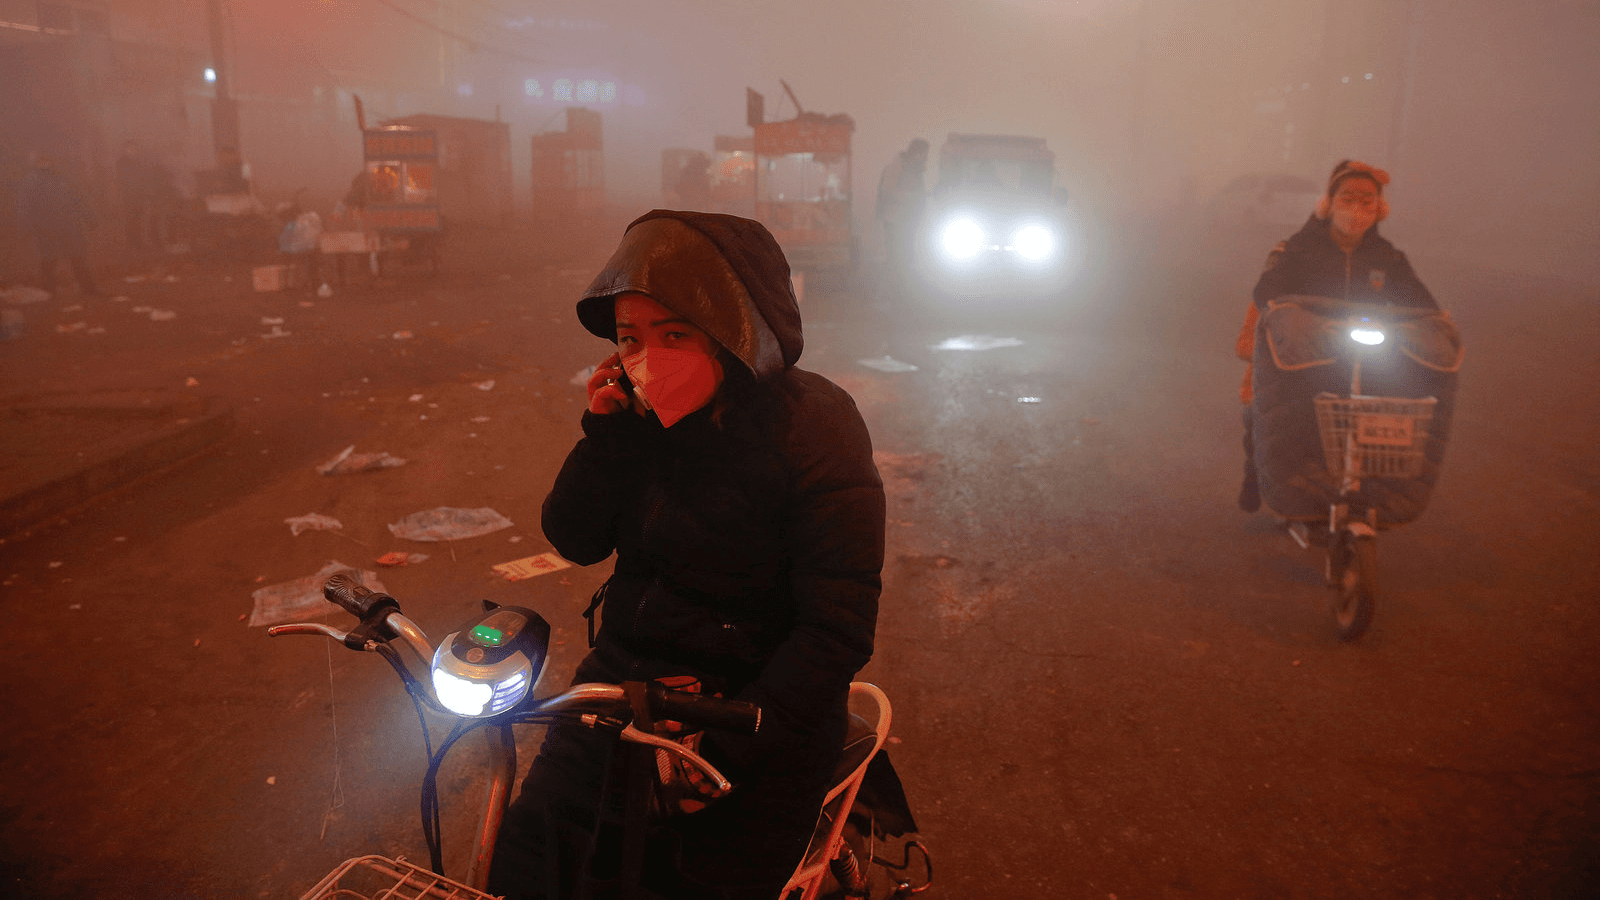 people ride motorcycles through heavy pollution in china